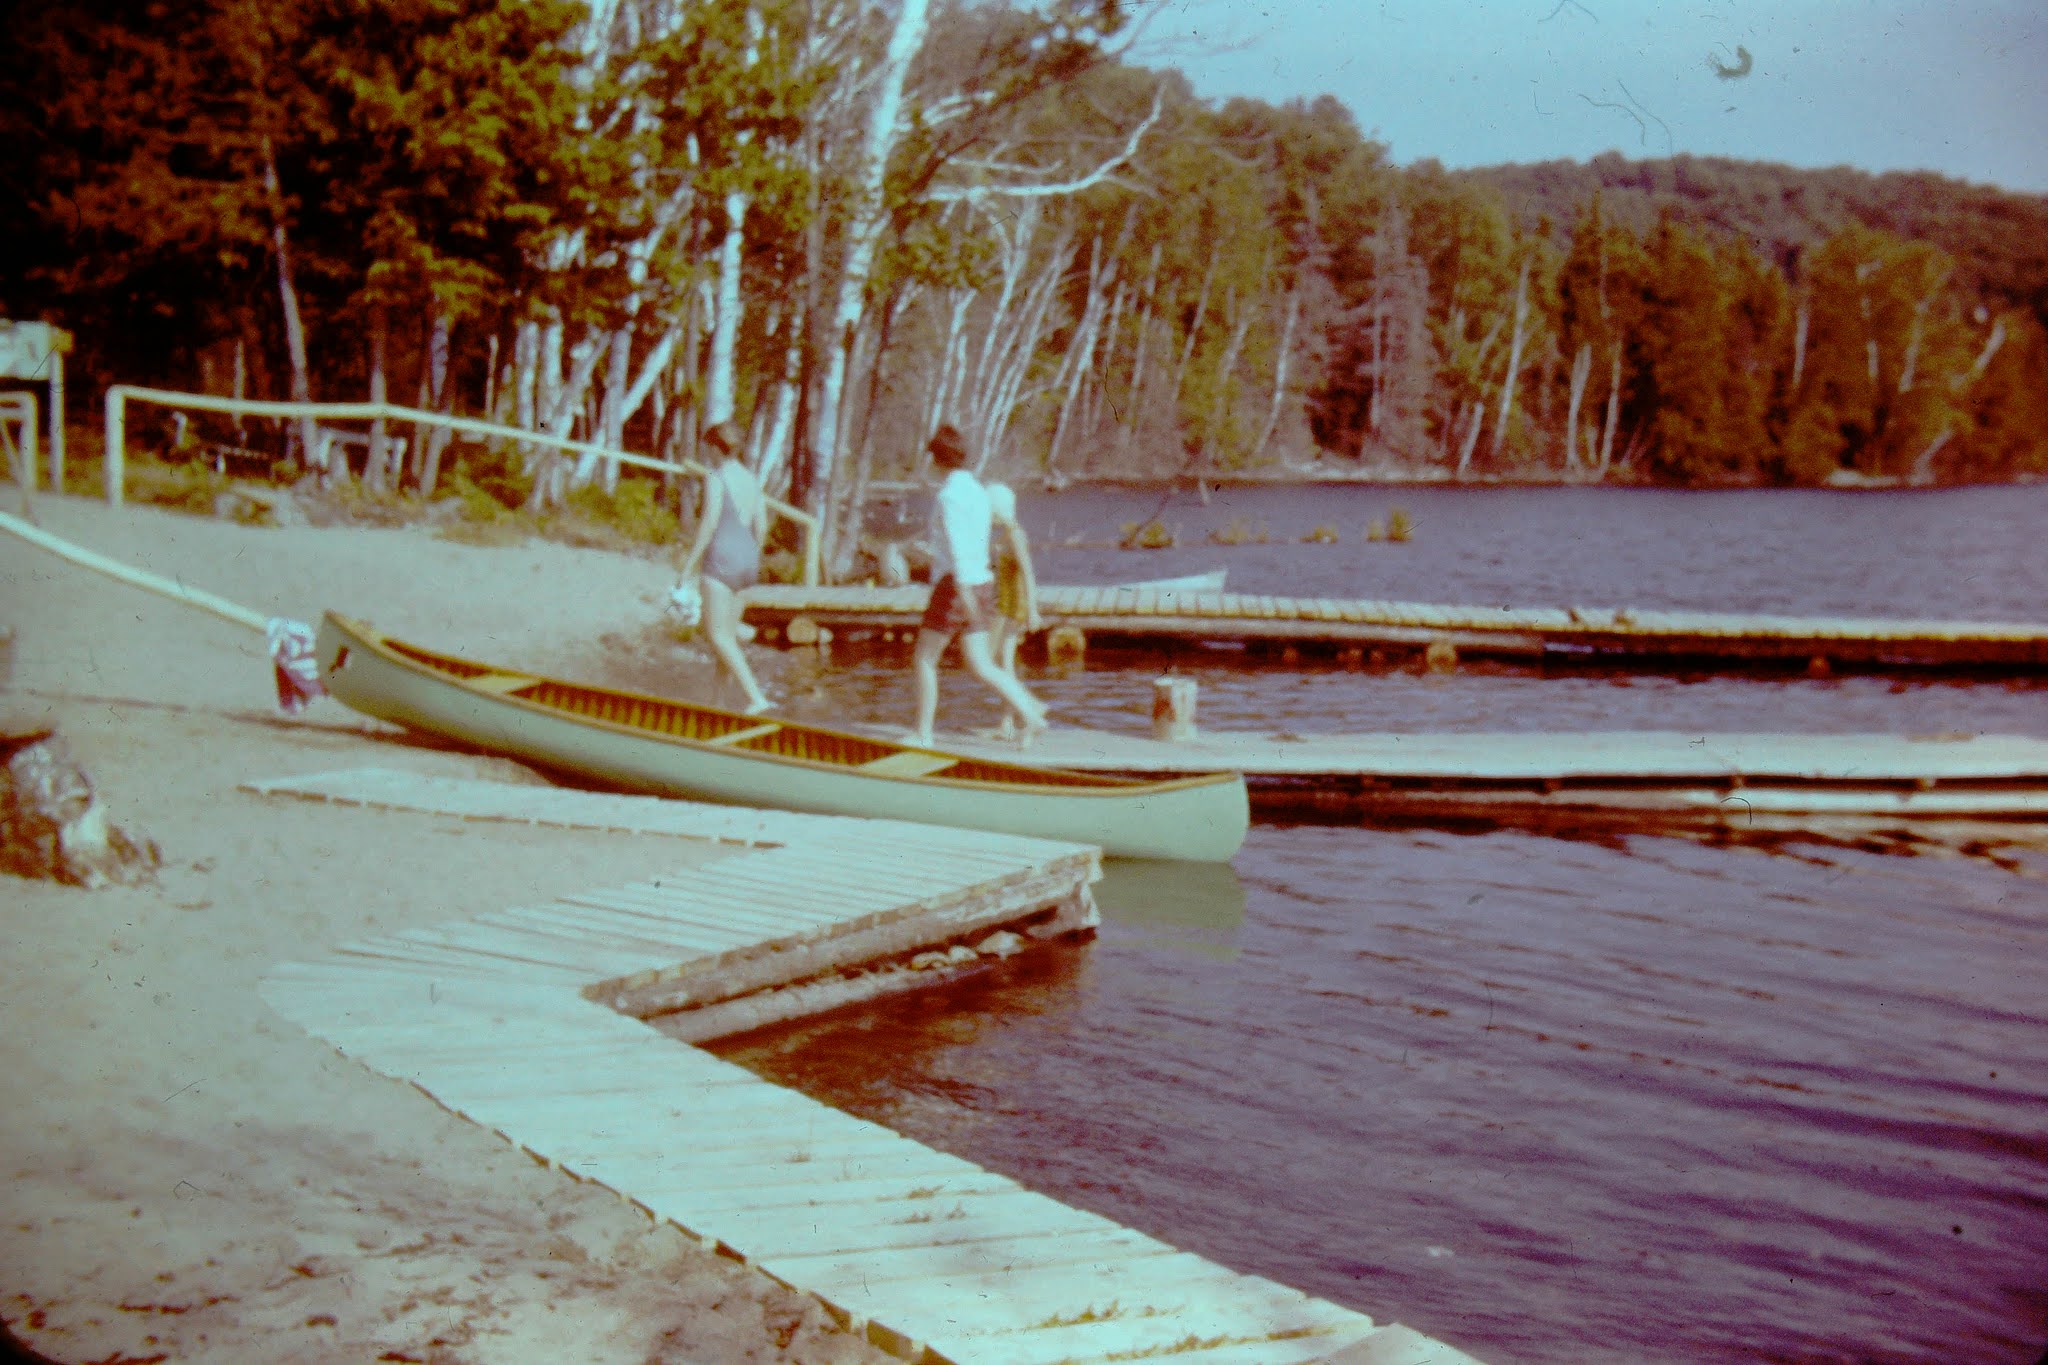 At the Dock 1963